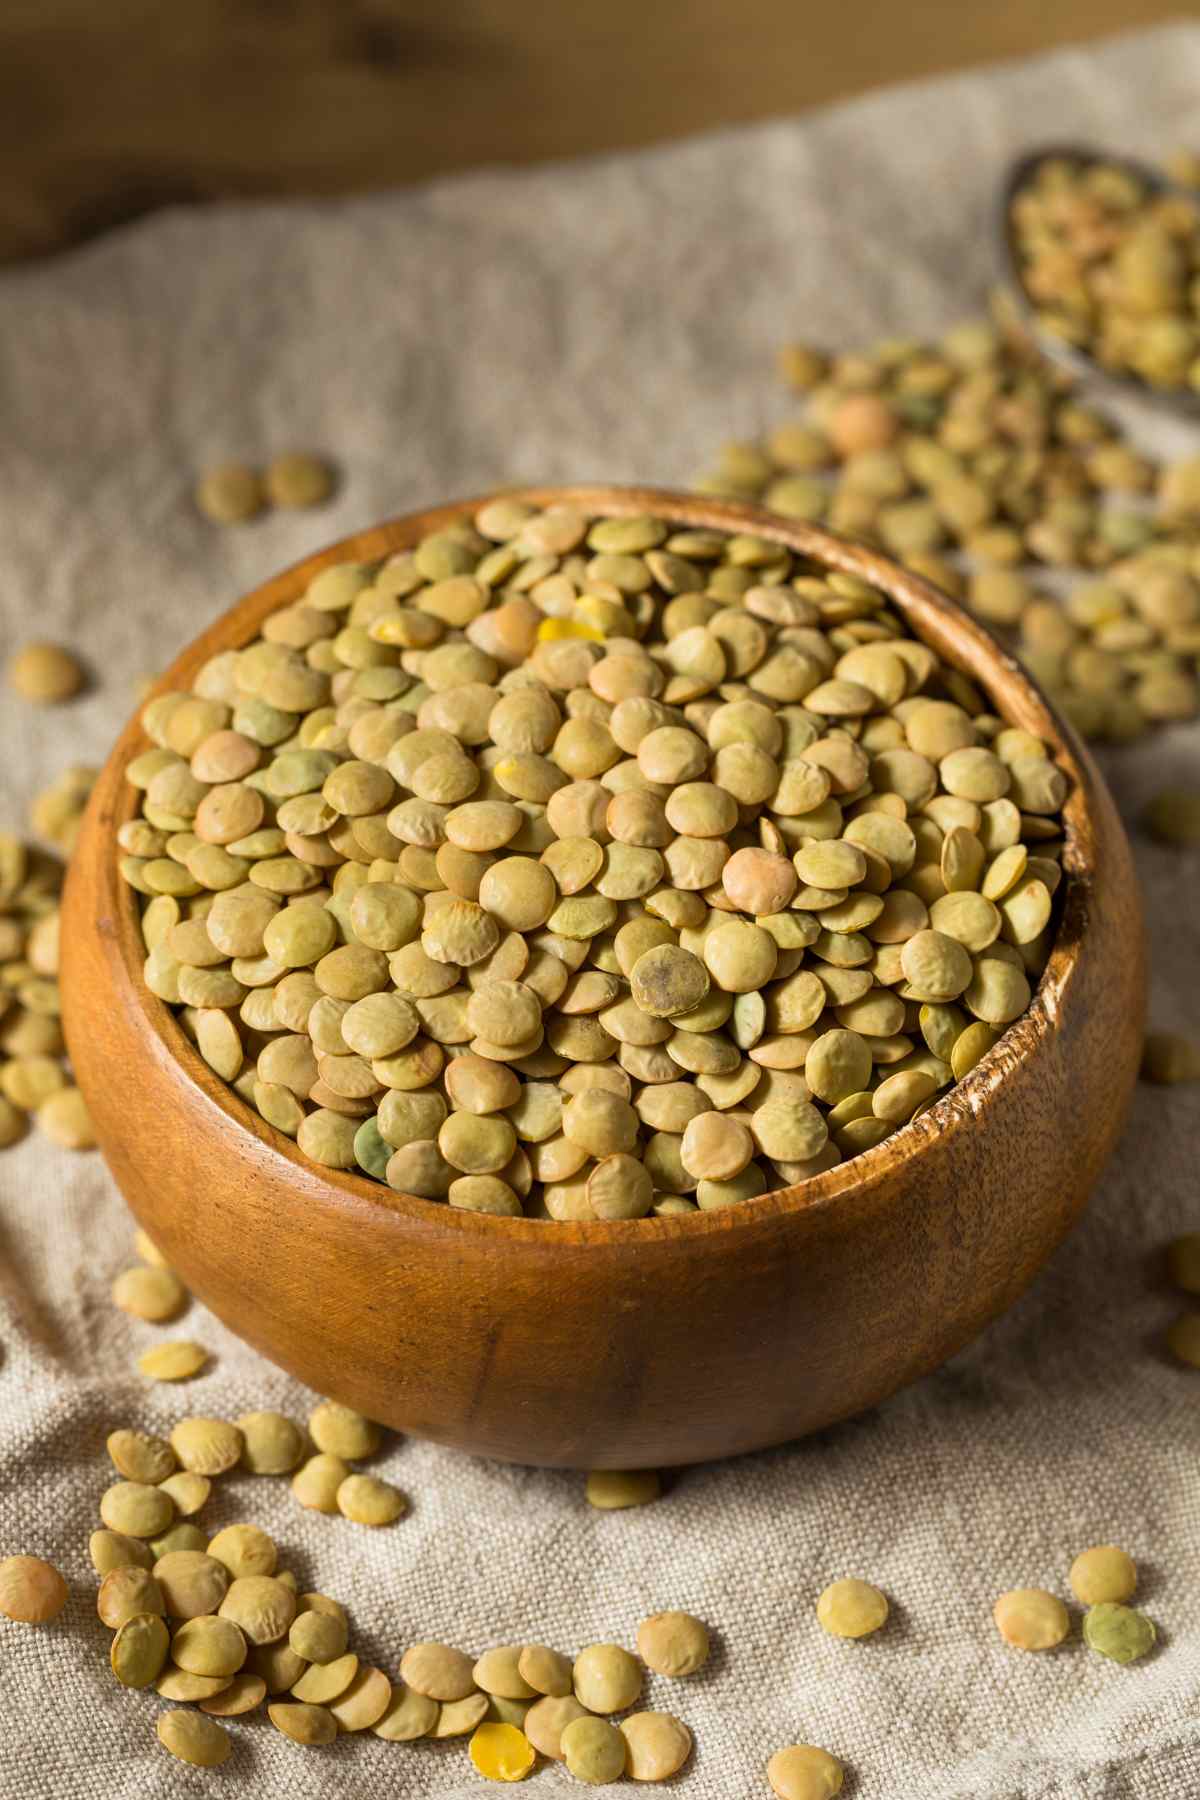 Are lentils keto? How many carbs are in lentils? Lentils are tasty and versatile legumes that can be used to make soups, stews and even vegan-friendly burger patties. They’re also well known for their health benefits, but can they fit into your keto diet?